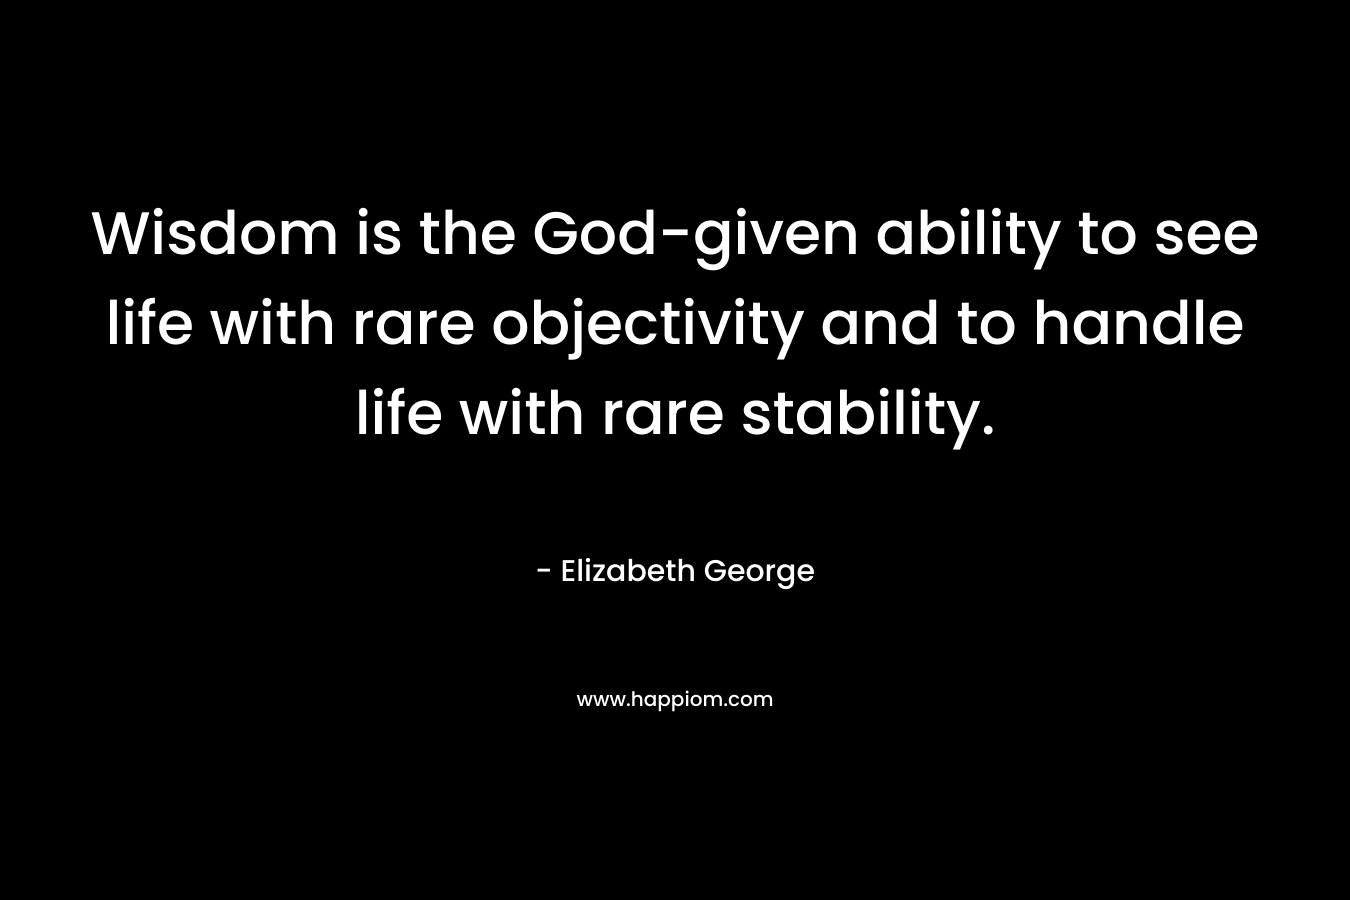 Wisdom is the God-given ability to see life with rare objectivity and to handle life with rare stability.